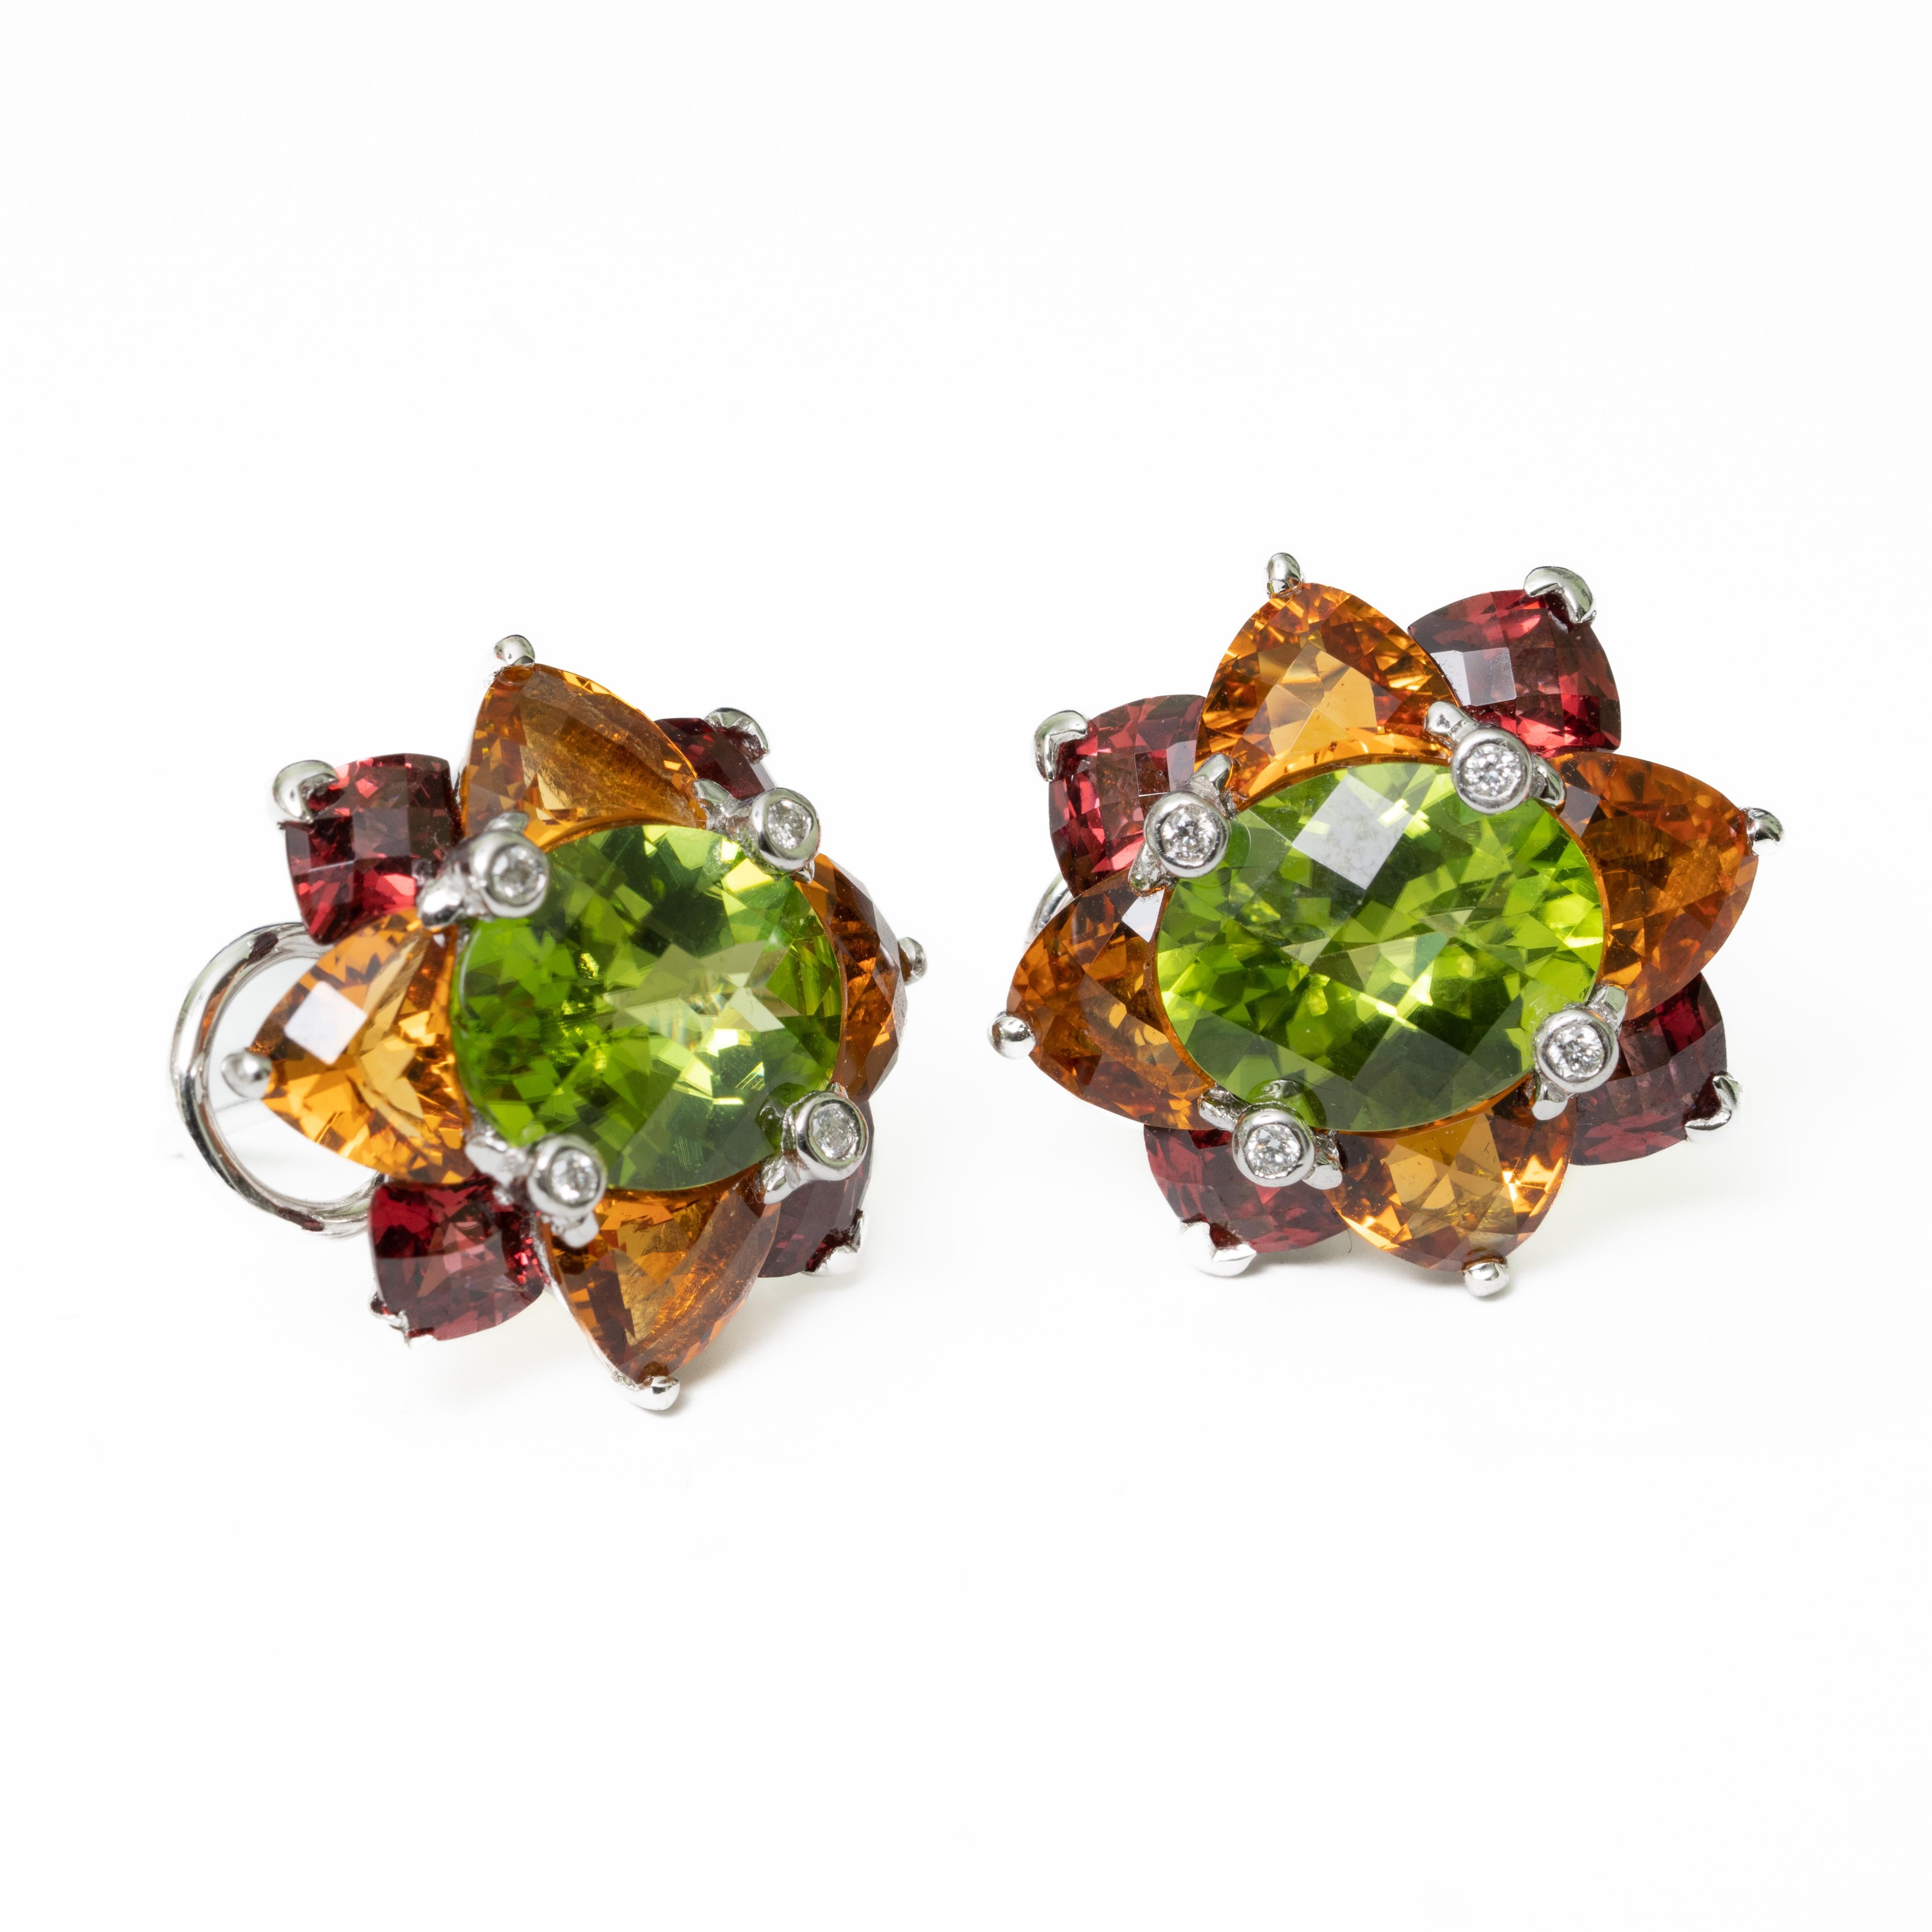 18k Signed Krementz White Gold, Diamond Peridot, Topaz and Citrine Earrings. Peridot Attributes: Oval faceted measuring 10.69 x 8.53 x 5.16mm approx. 3.36 Cts approx. Citrine Attribute: heart shaped faceted 0.33 to .40 Cts each. 1.40 Cts approx.